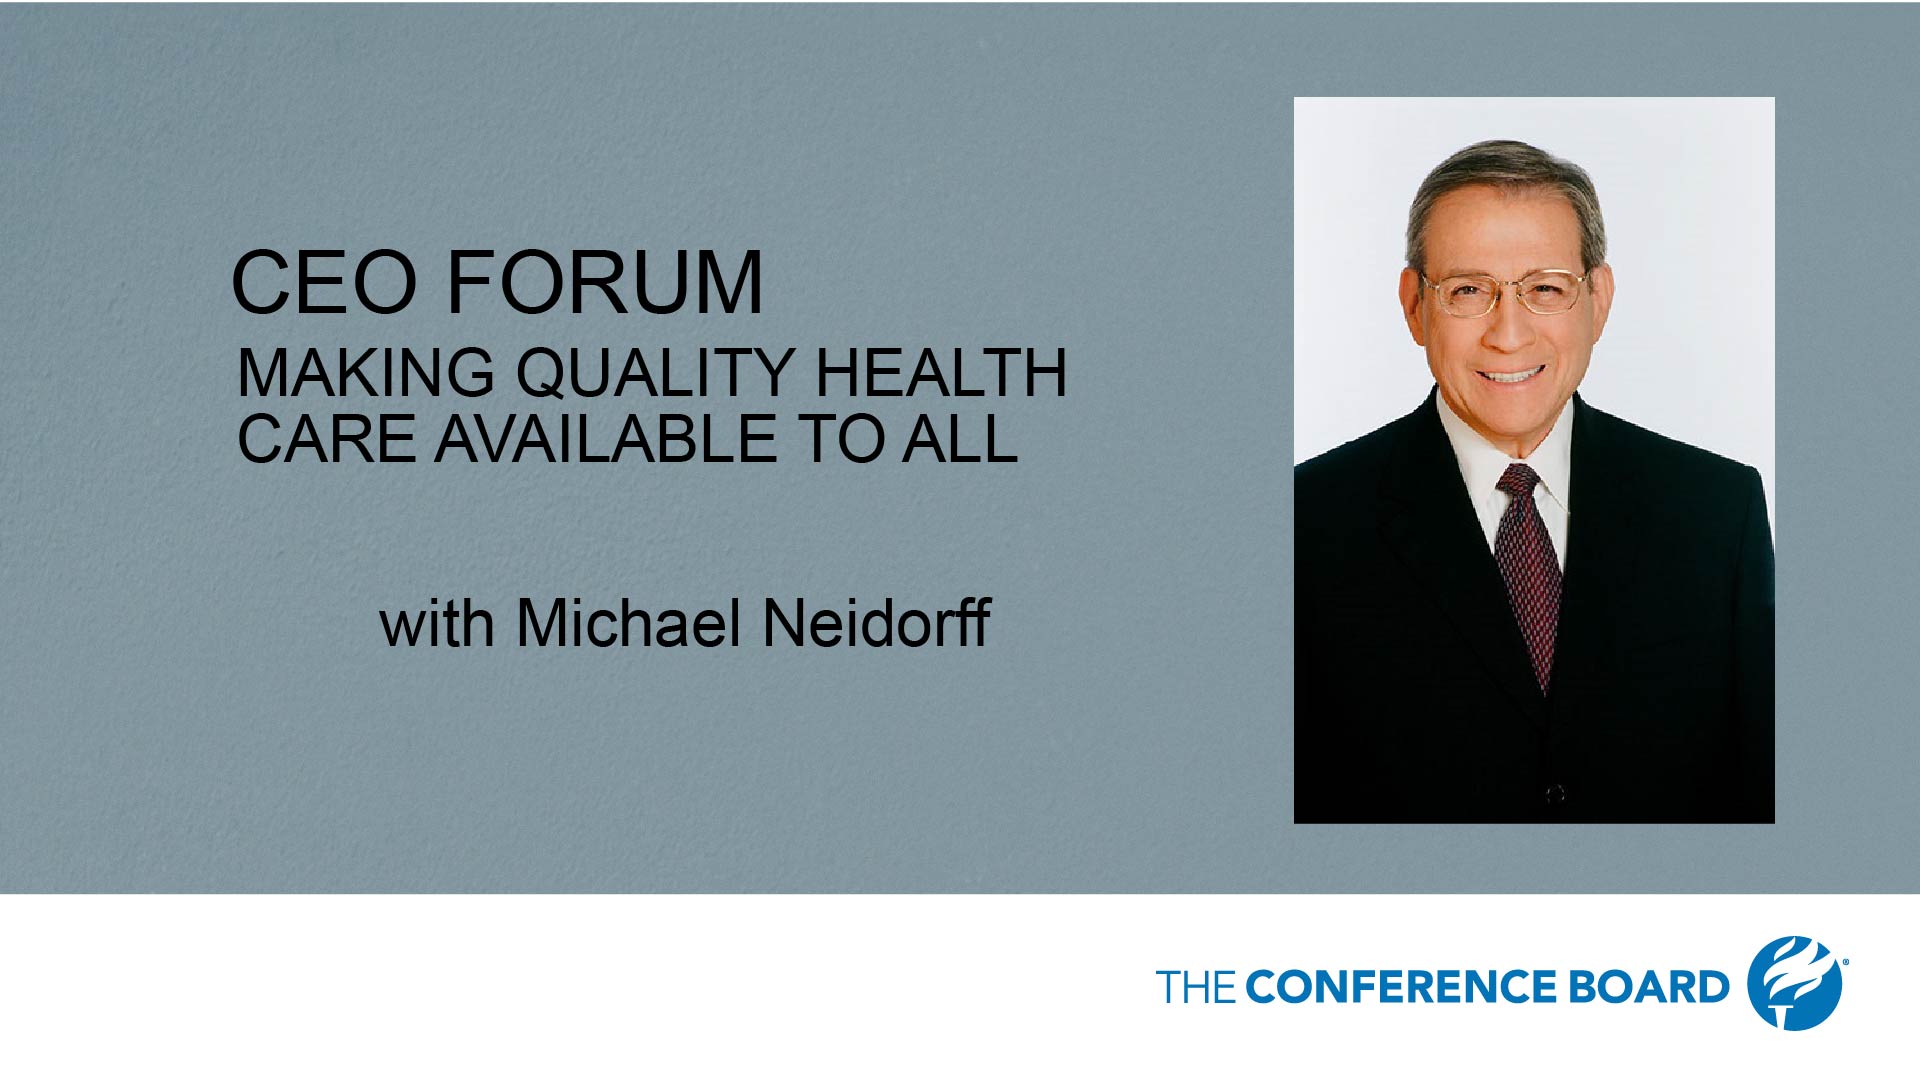 Centene Corporation CEO Michael Neidorff, Discusses Quality Healthcare in a Pandemic Economy